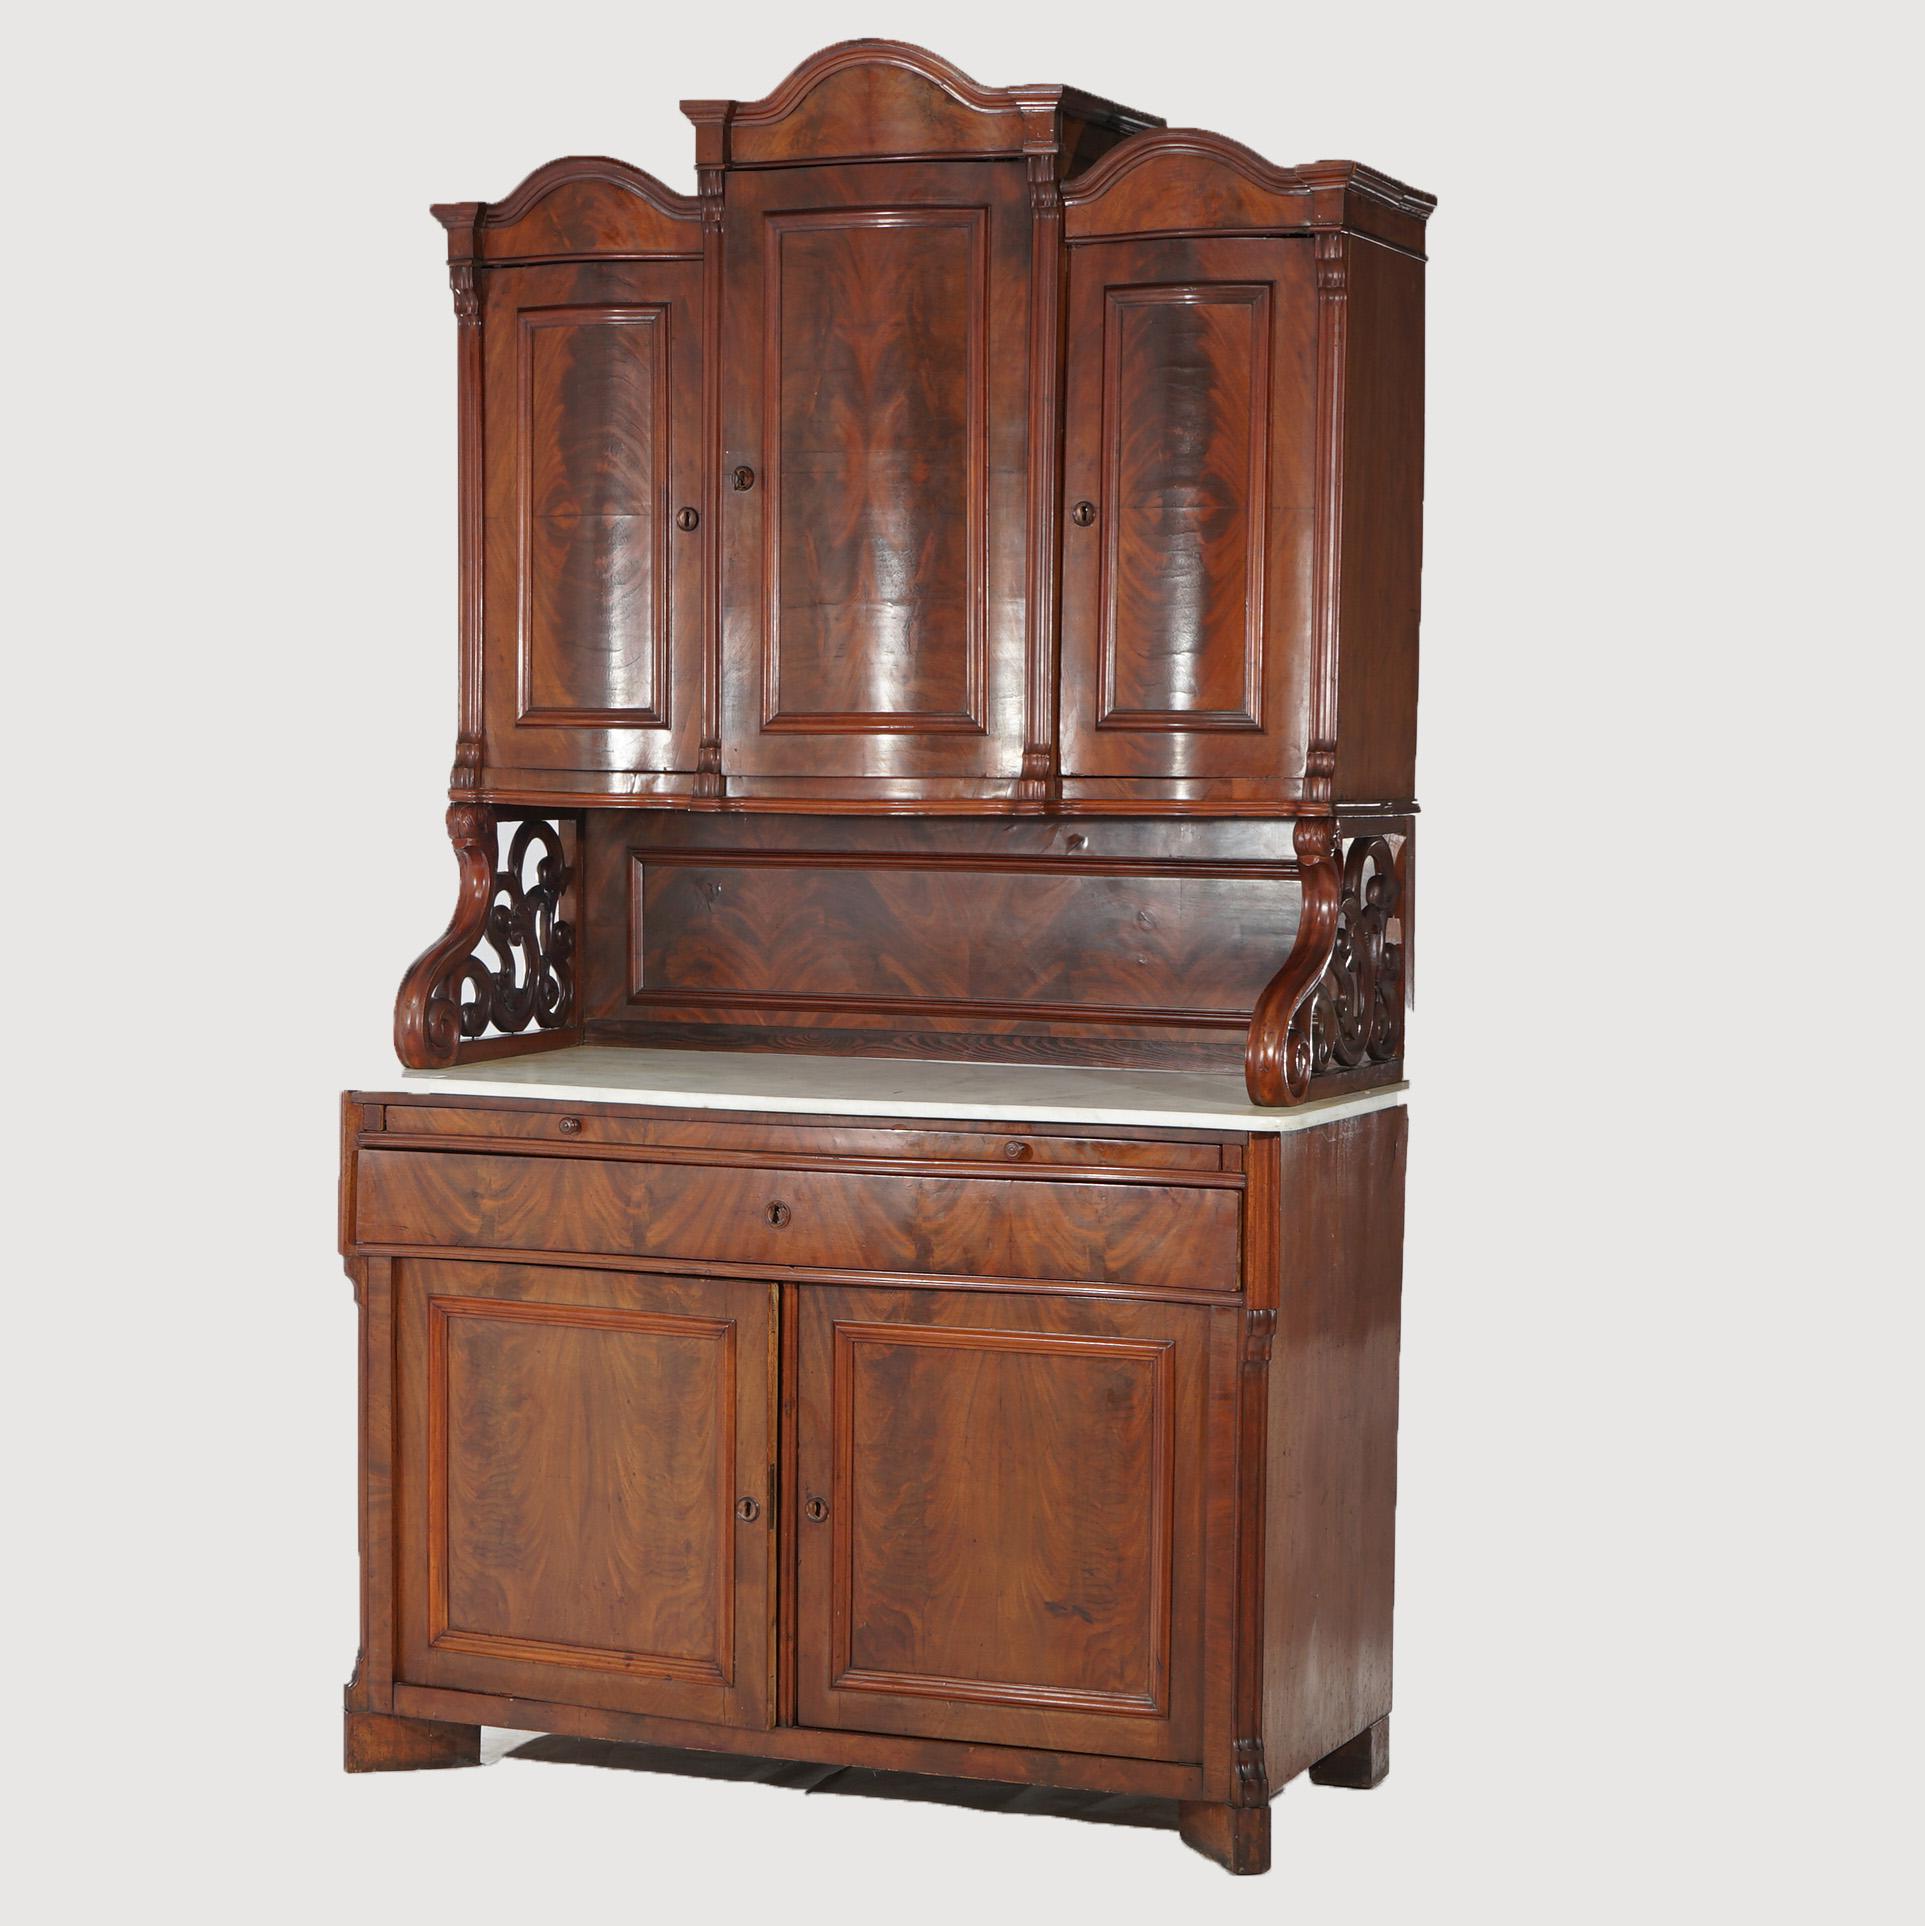 An antique sideboard offers flame mahogany construction with upper case having arched pediment over triple blind door cabinets, raised on foliate carved supports surmounting lower marble top case having slide-out server, single long drawer and